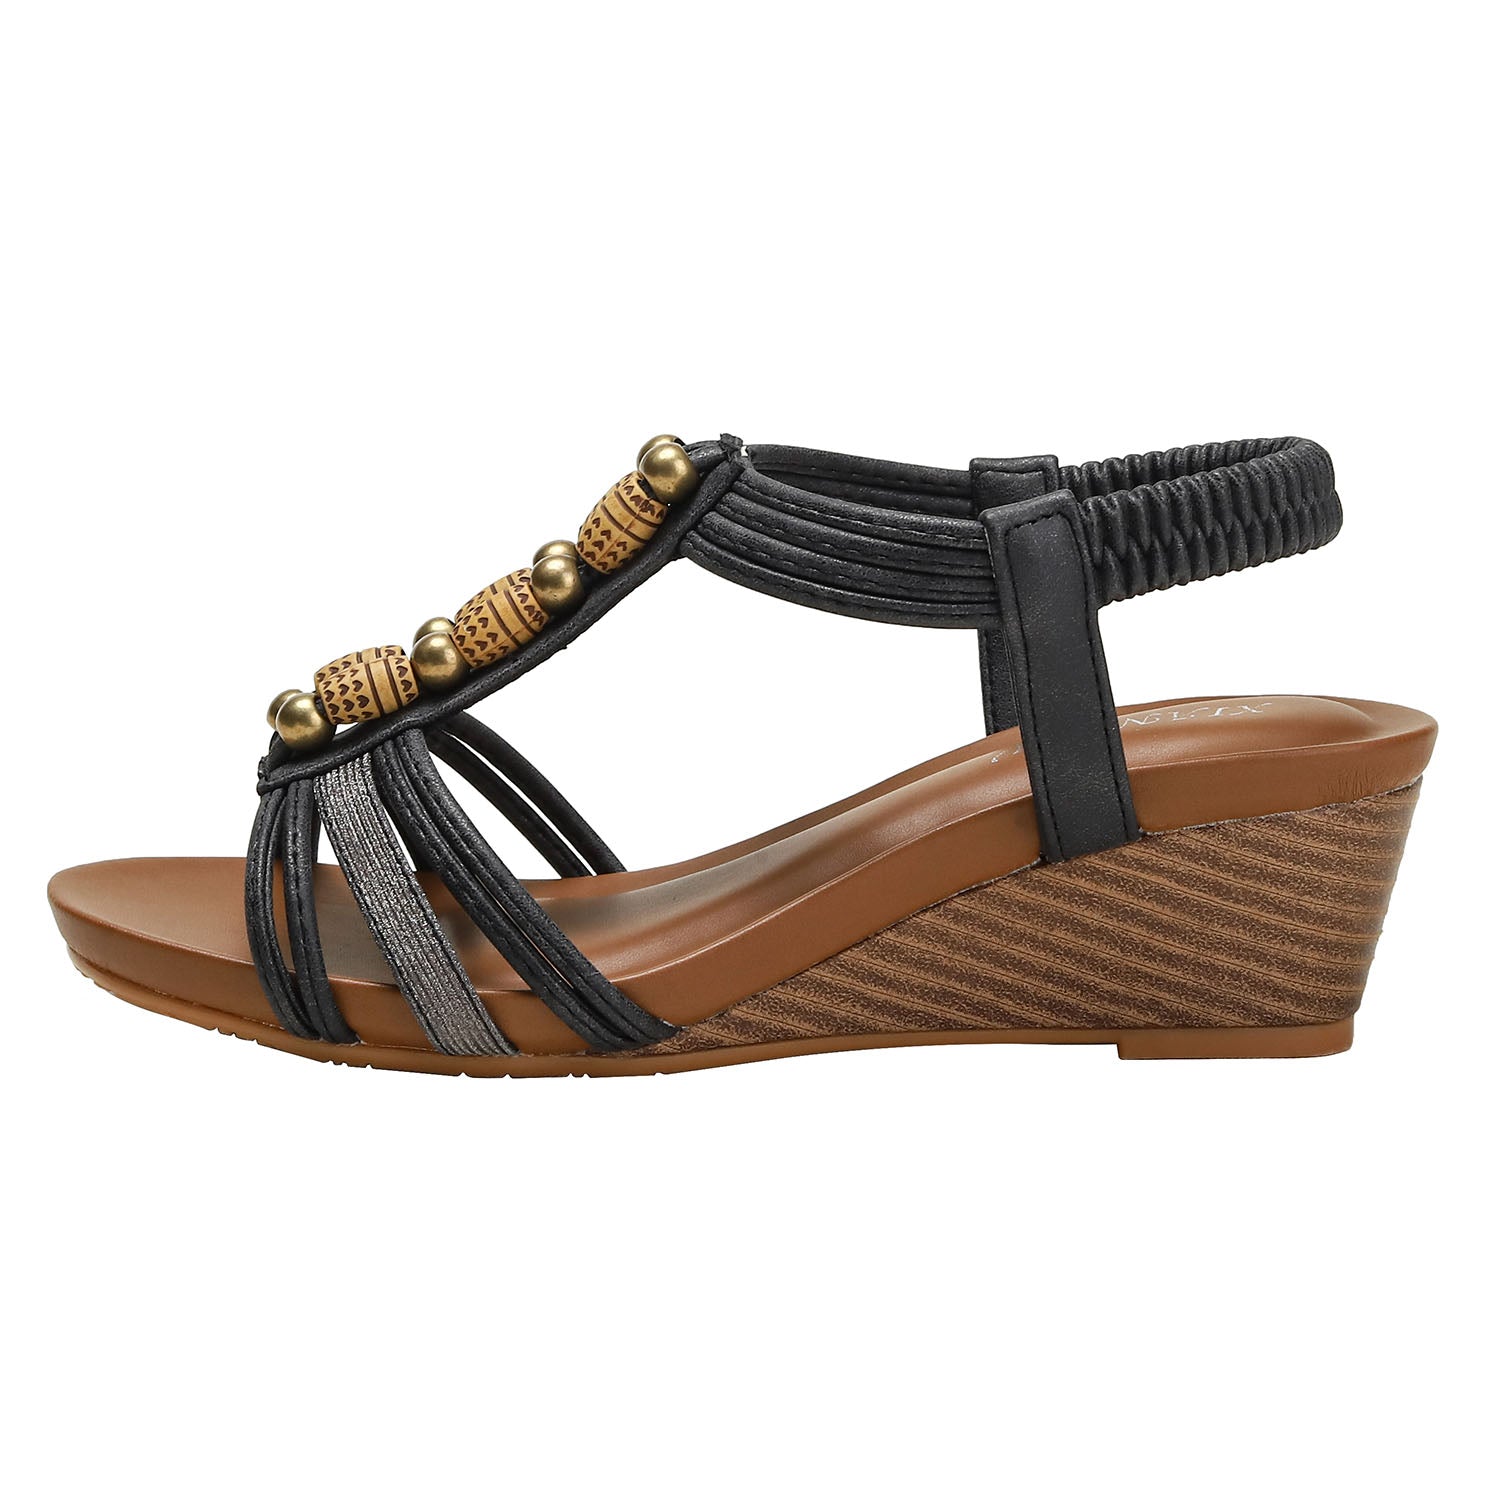 Bohemian Vacation Wedges Sandals